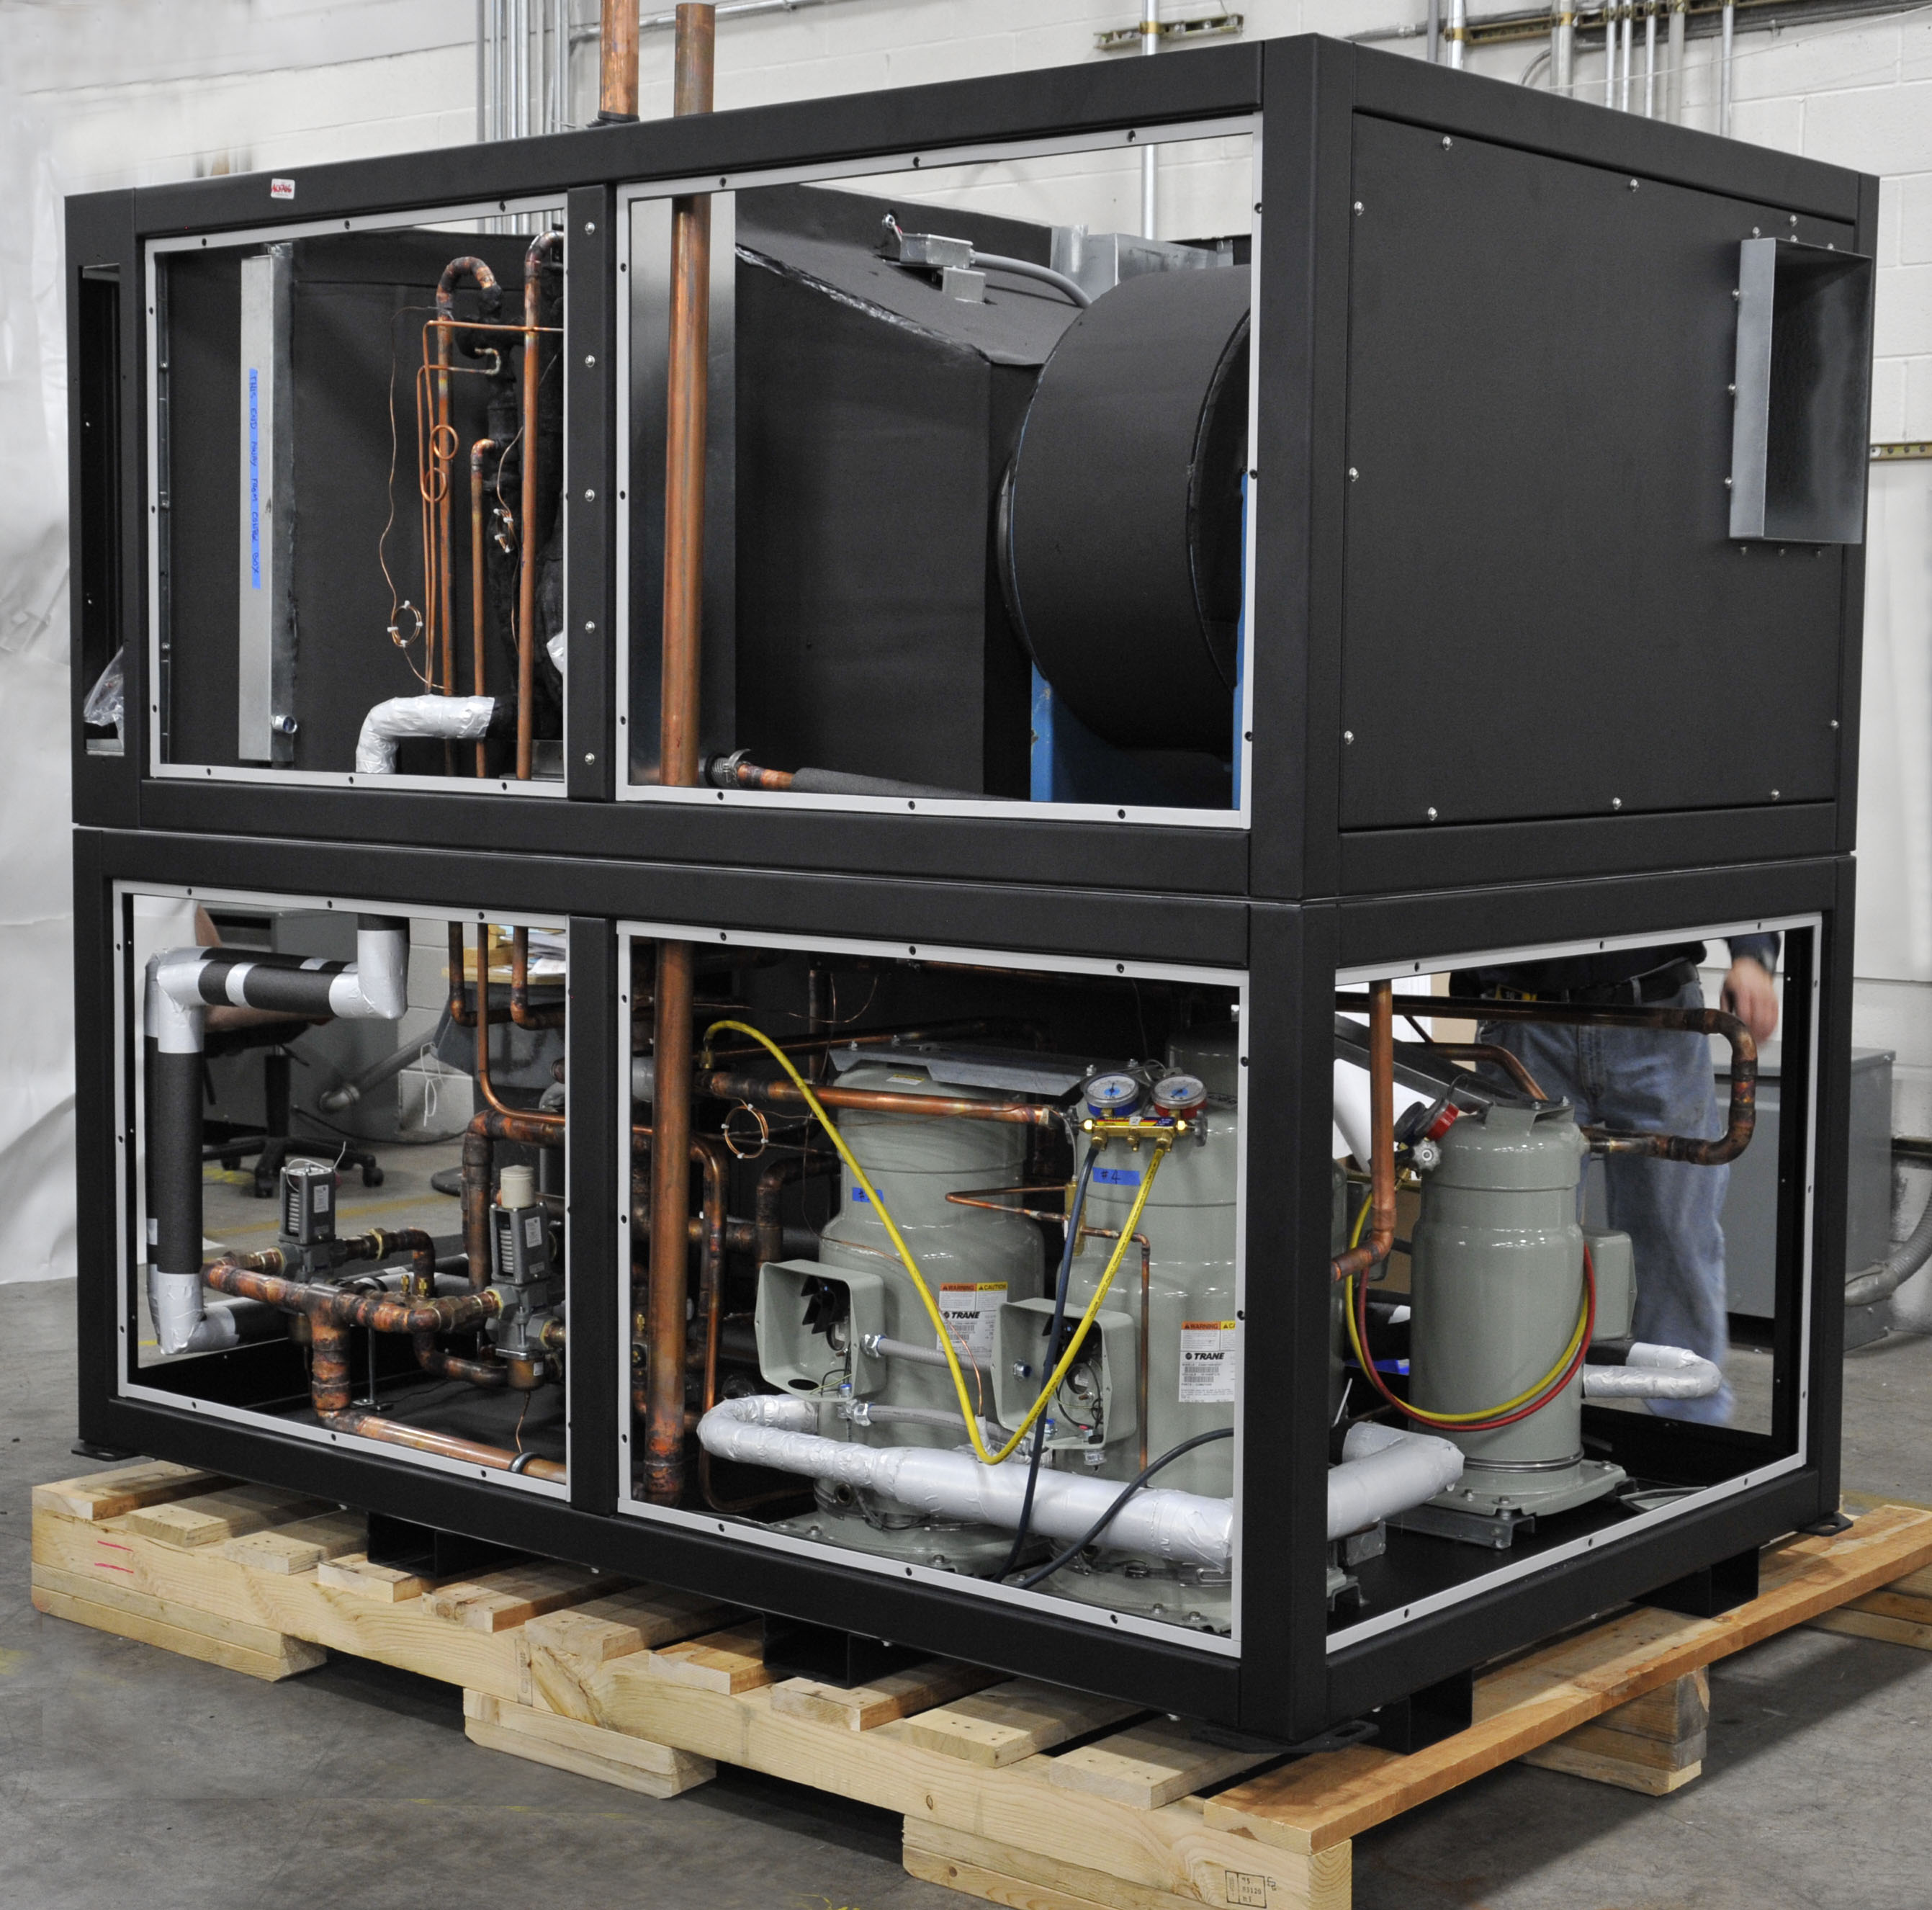 Air Innovations' supplied three fixed core environmental control systems (ECUs) to create critical payload conditions to the Antares rocket prior to its launch at the Mid-Atlantic Regional Spaceport